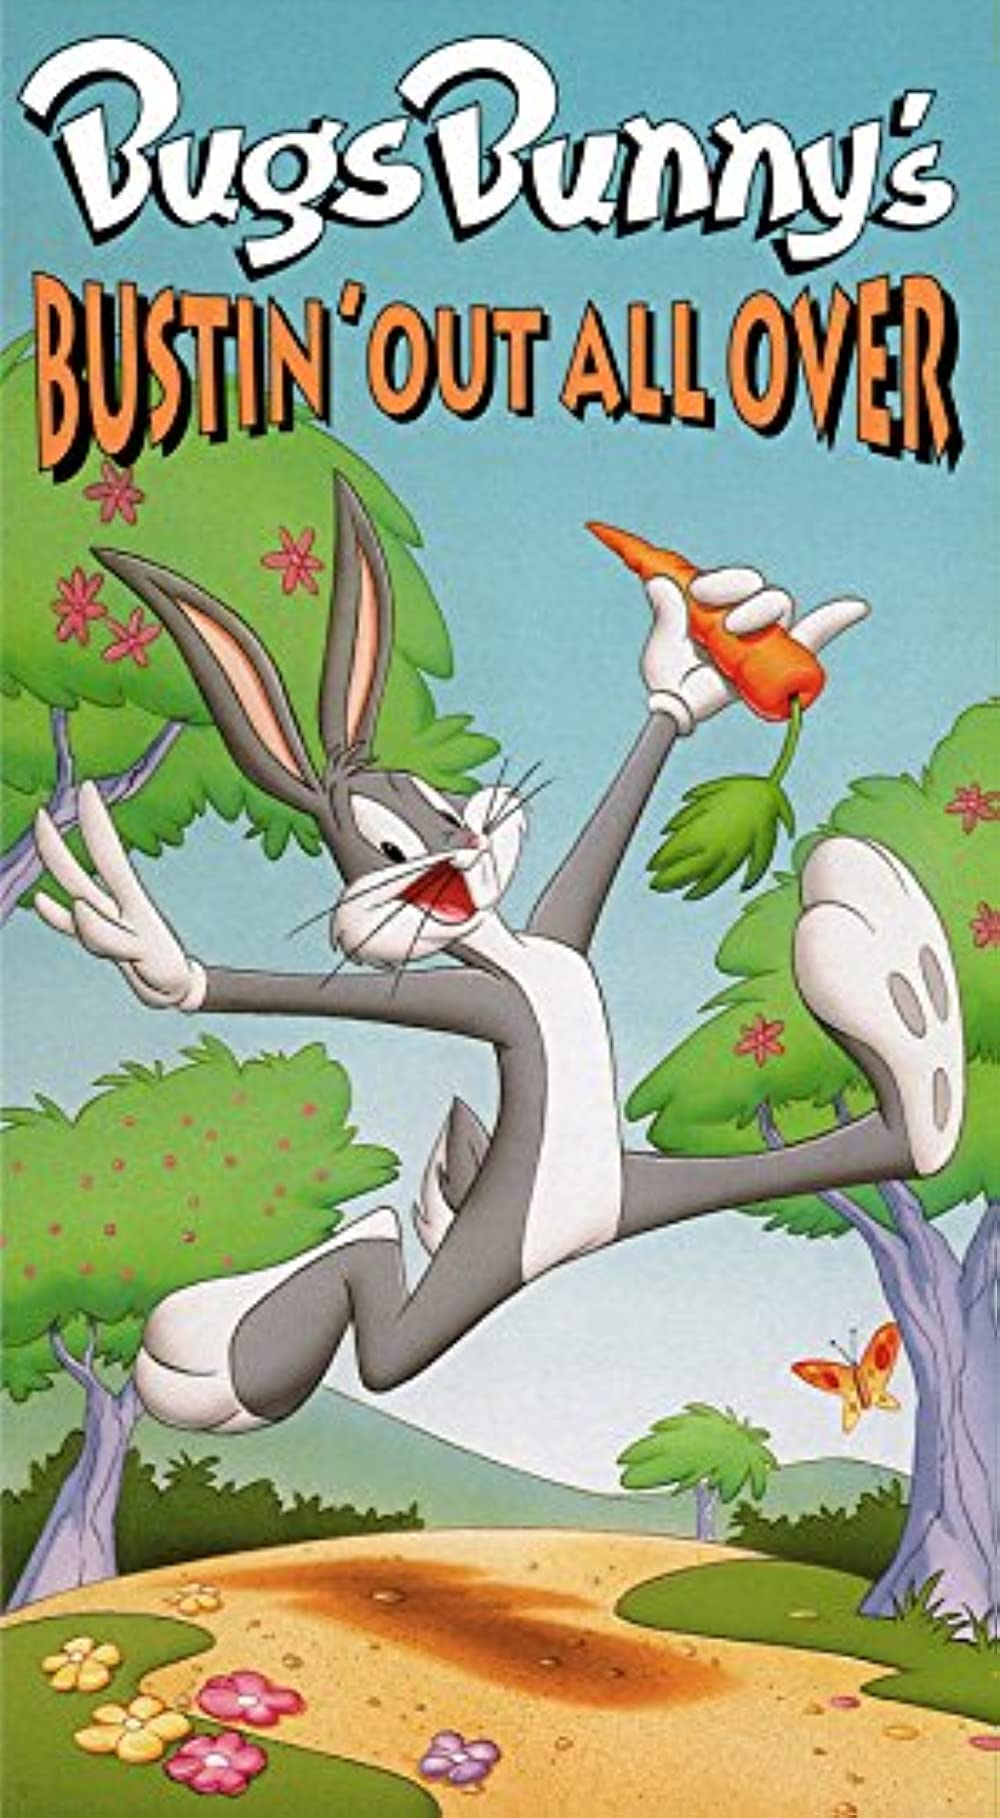 Bugs Bunny’s Bustin’ Out All Over (1980)